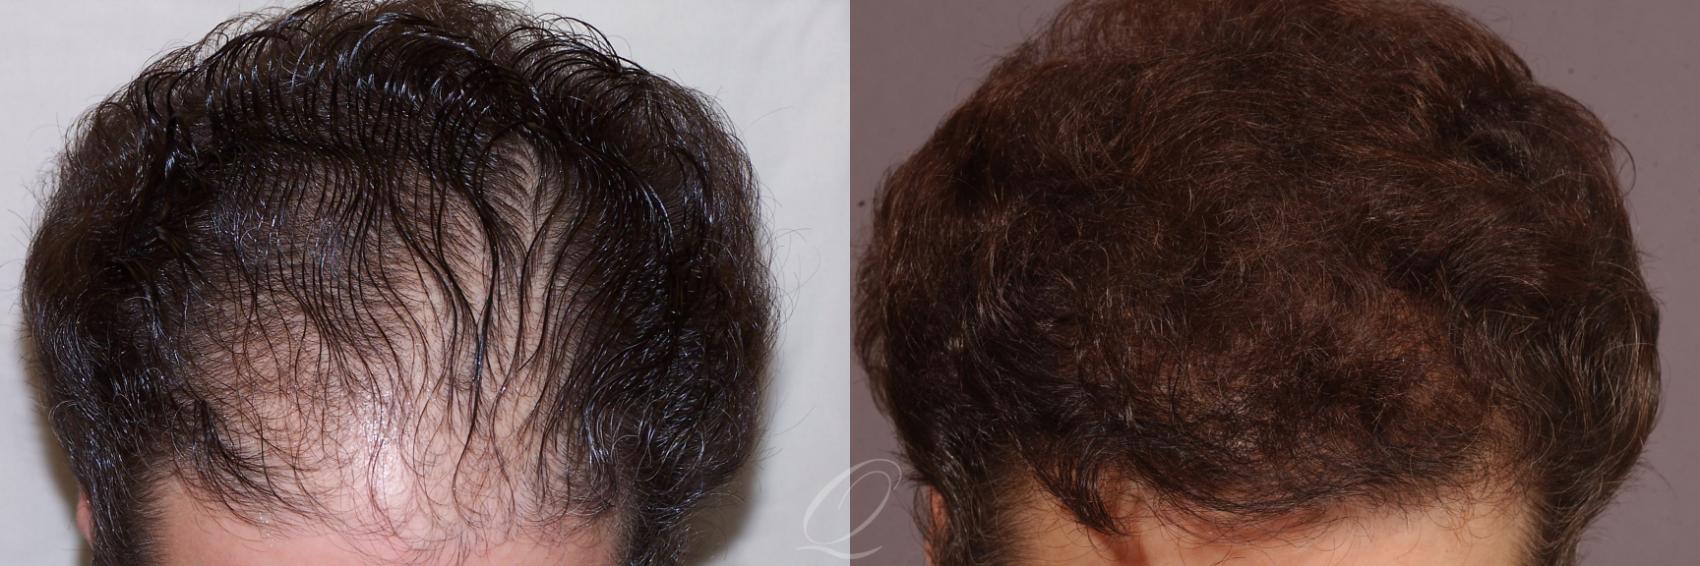 Female FUT Hair Transplant Case 1049 Before & After View #1 | Rochester, Buffalo, & Syracuse, NY | Quatela Center for Hair Restoration